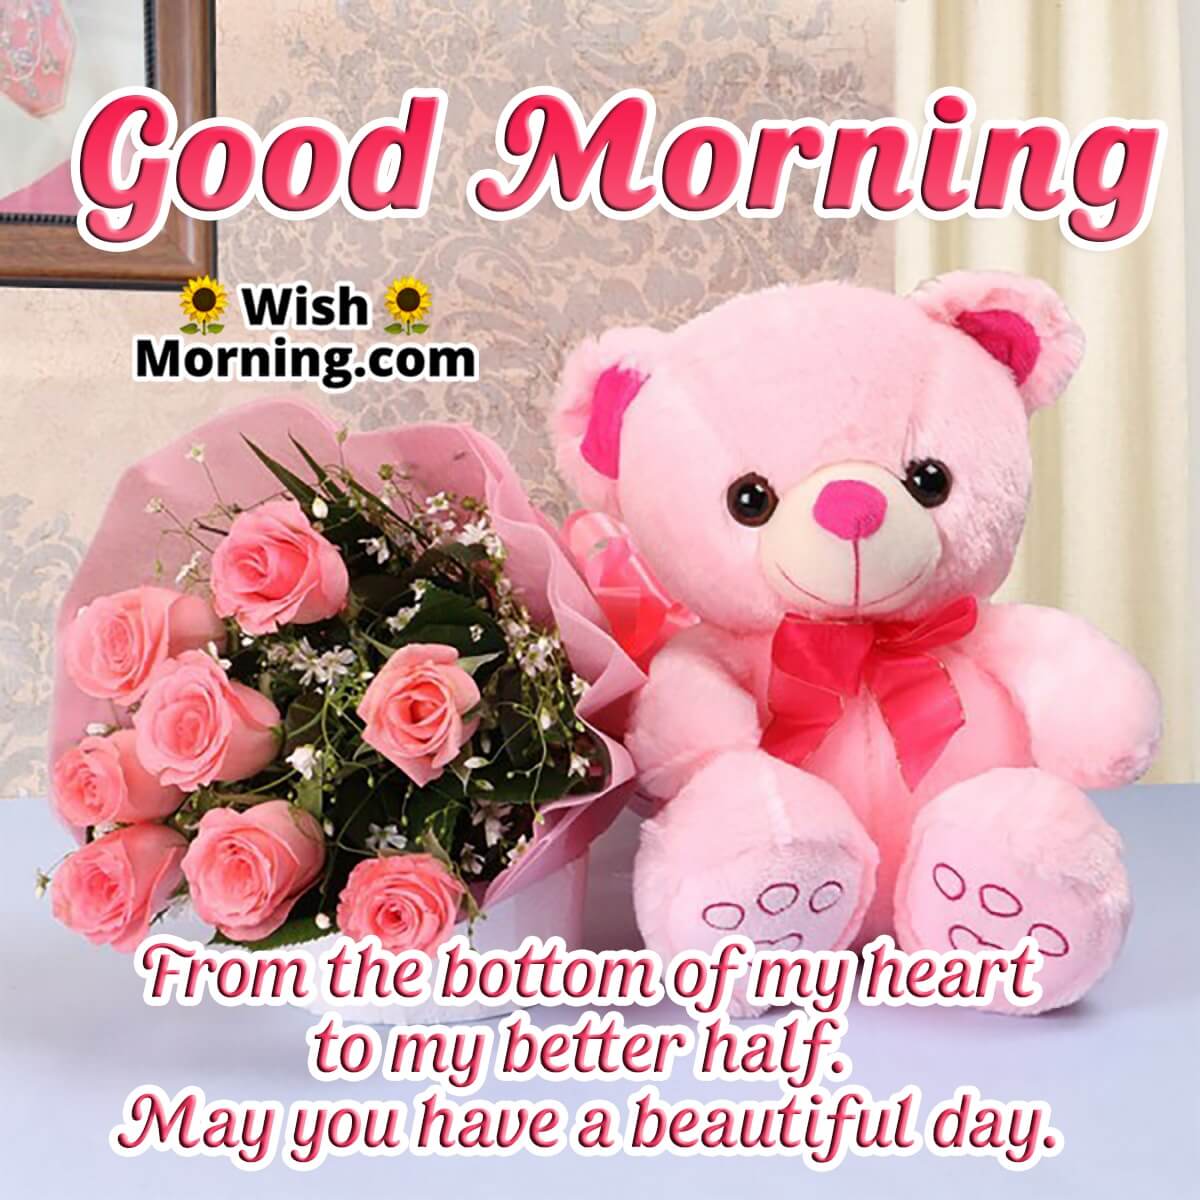 Good Morning Teddy Message For Husband